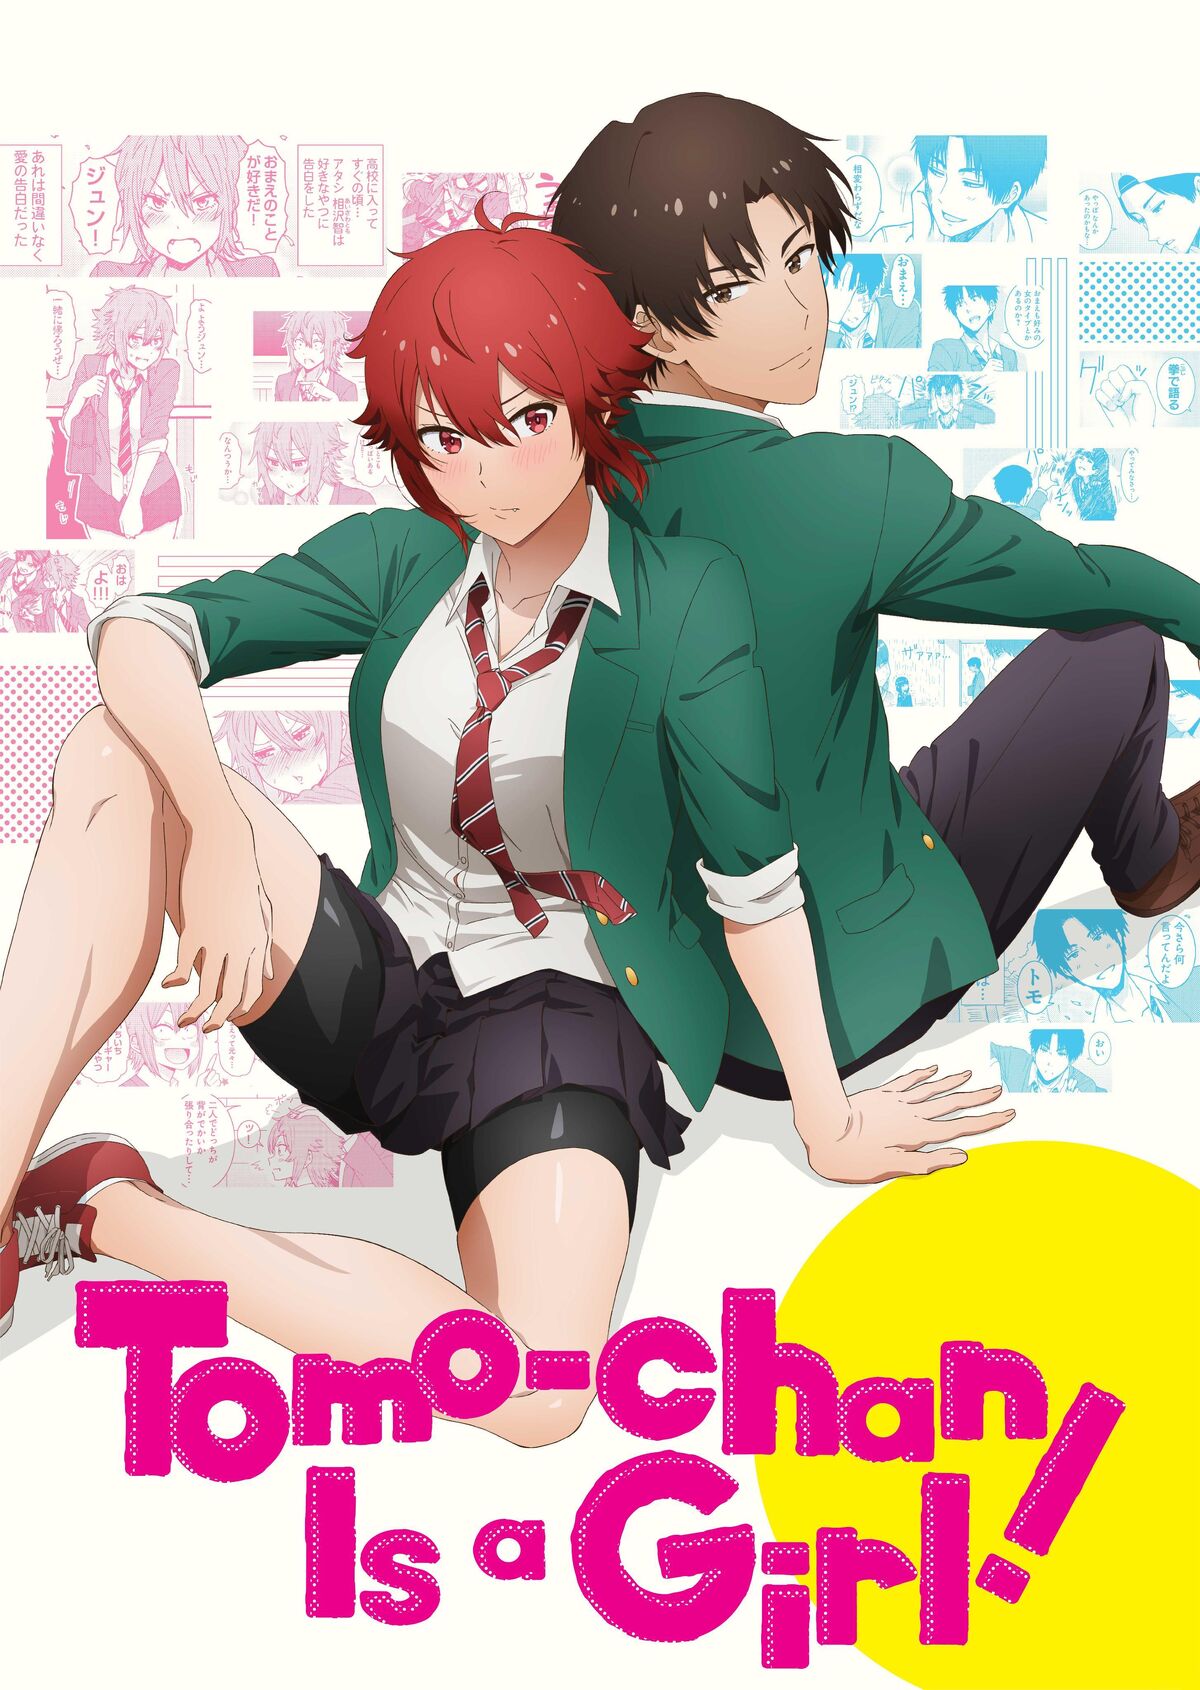 Sally Amaki voices Carol in the Japanese and English version of Tomo-chan